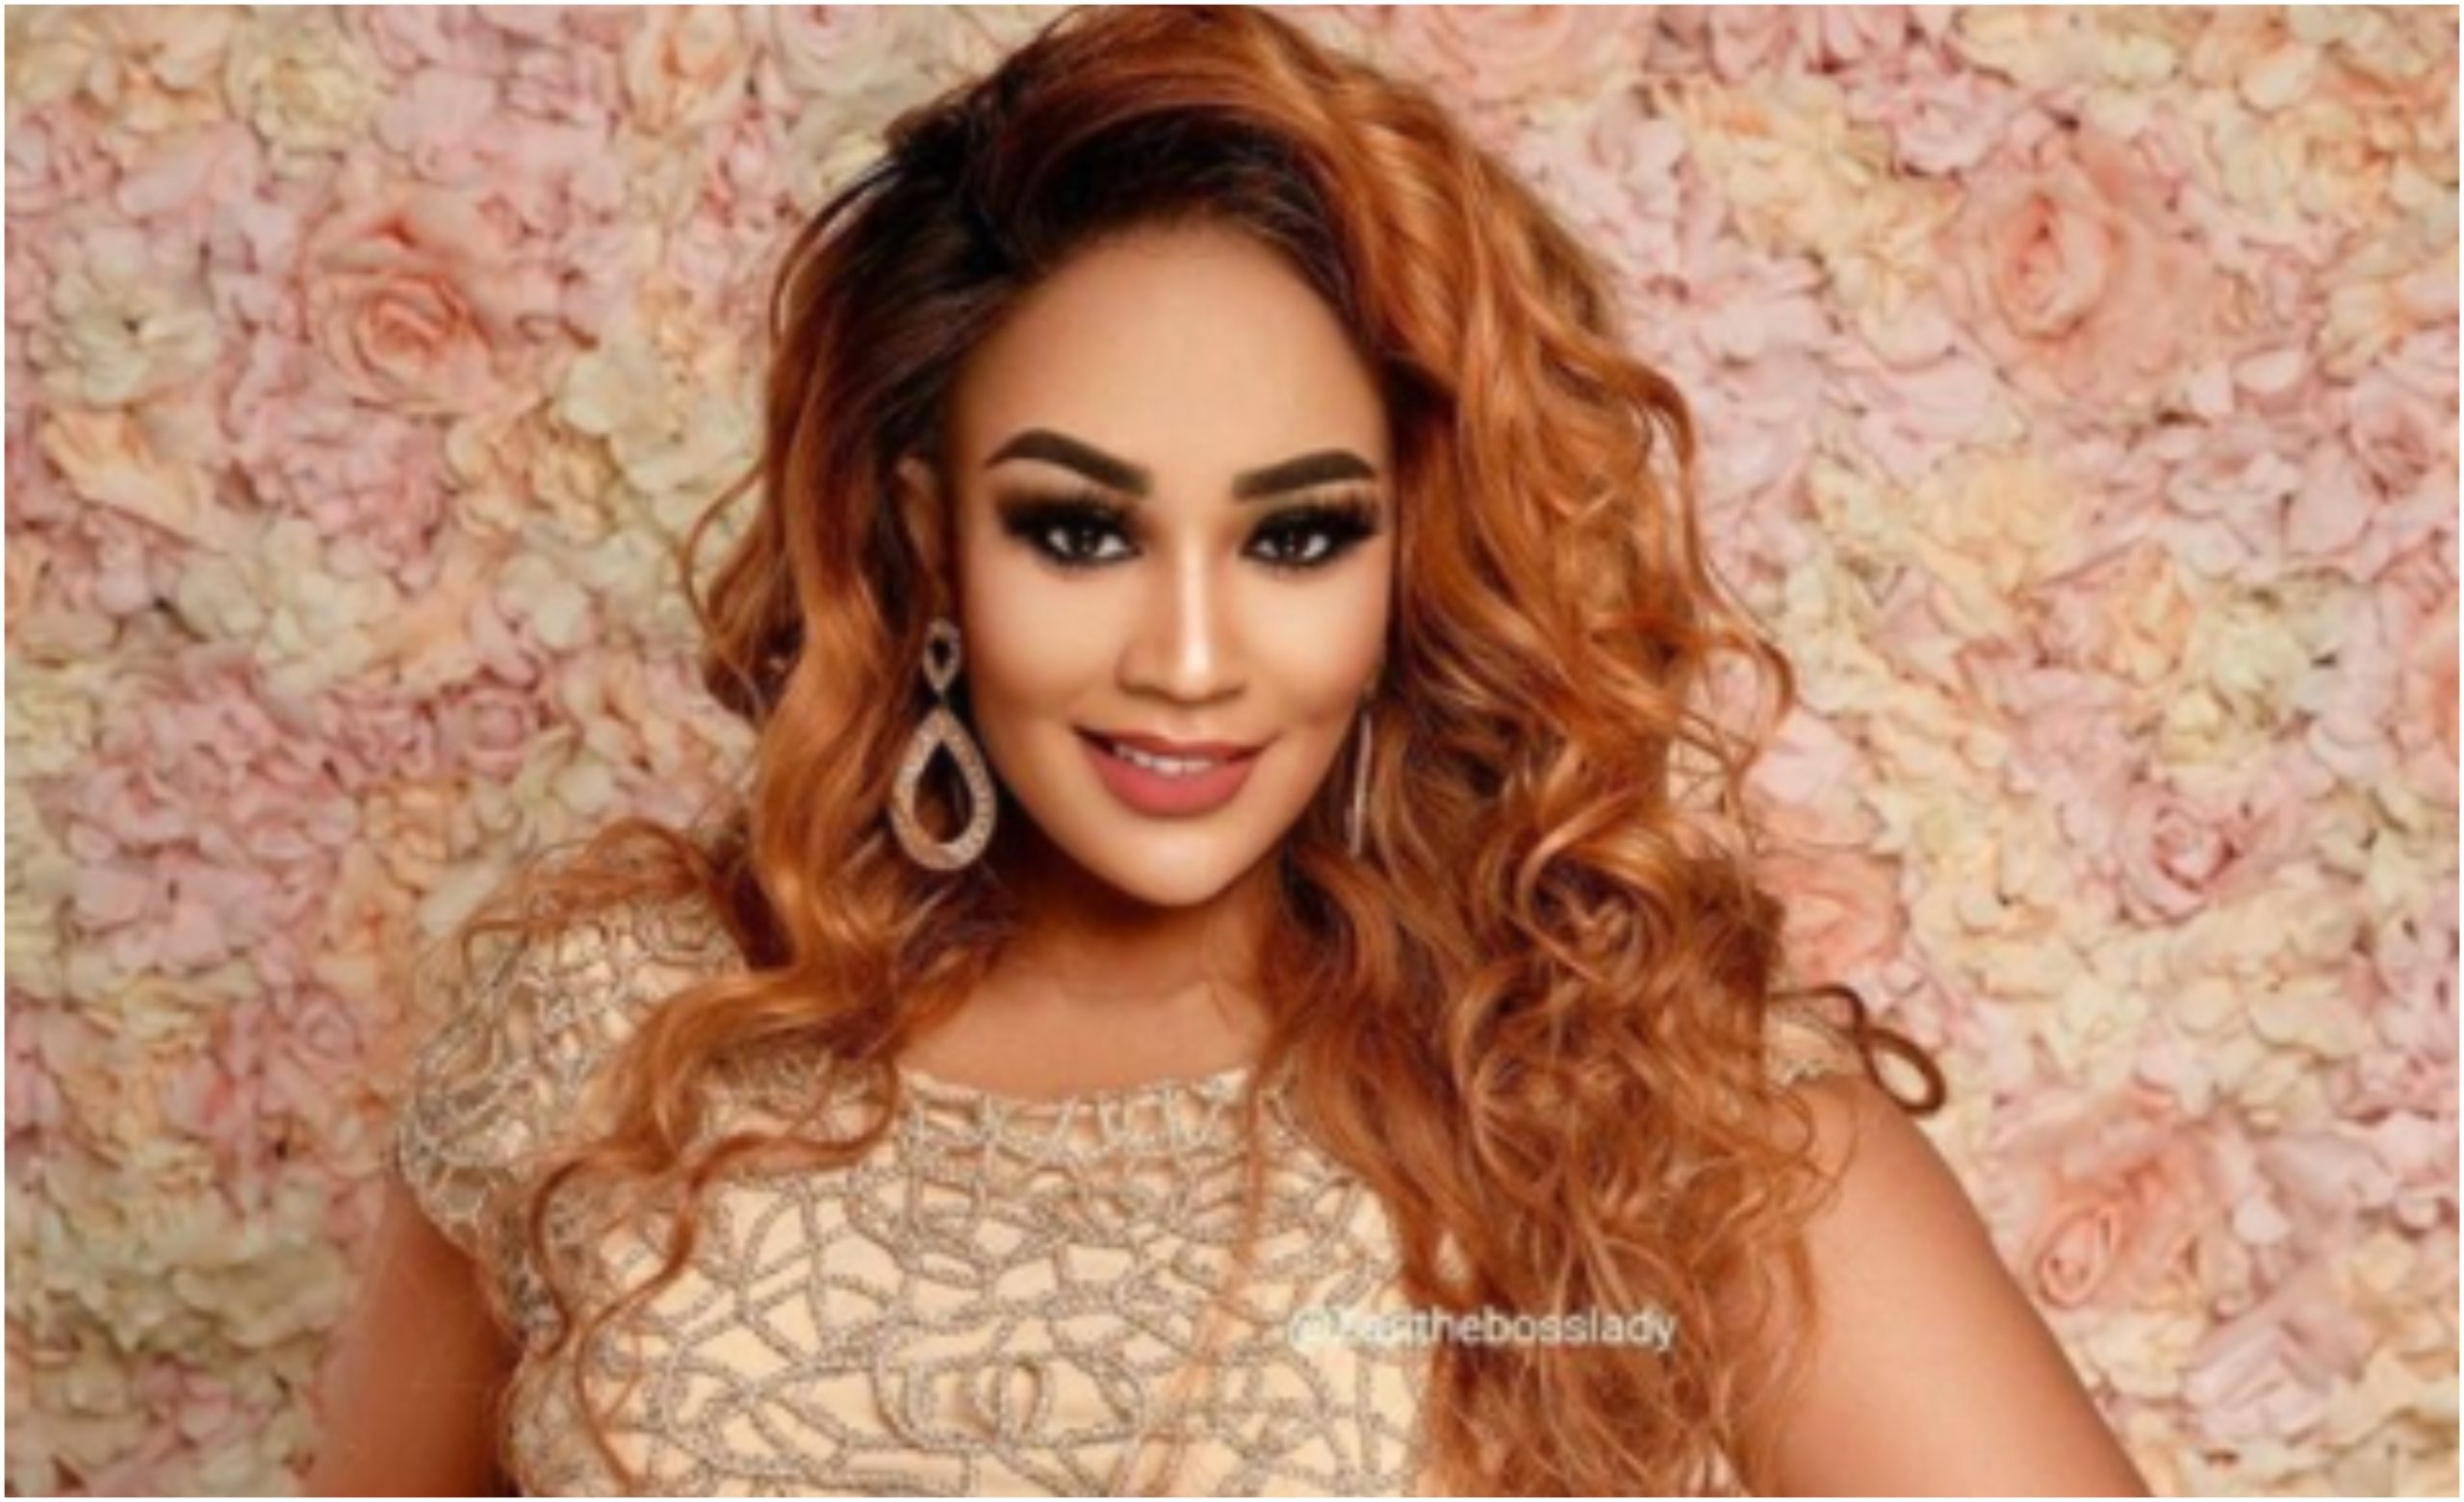 Why Zari can only blame herself for the hate she receives over her body